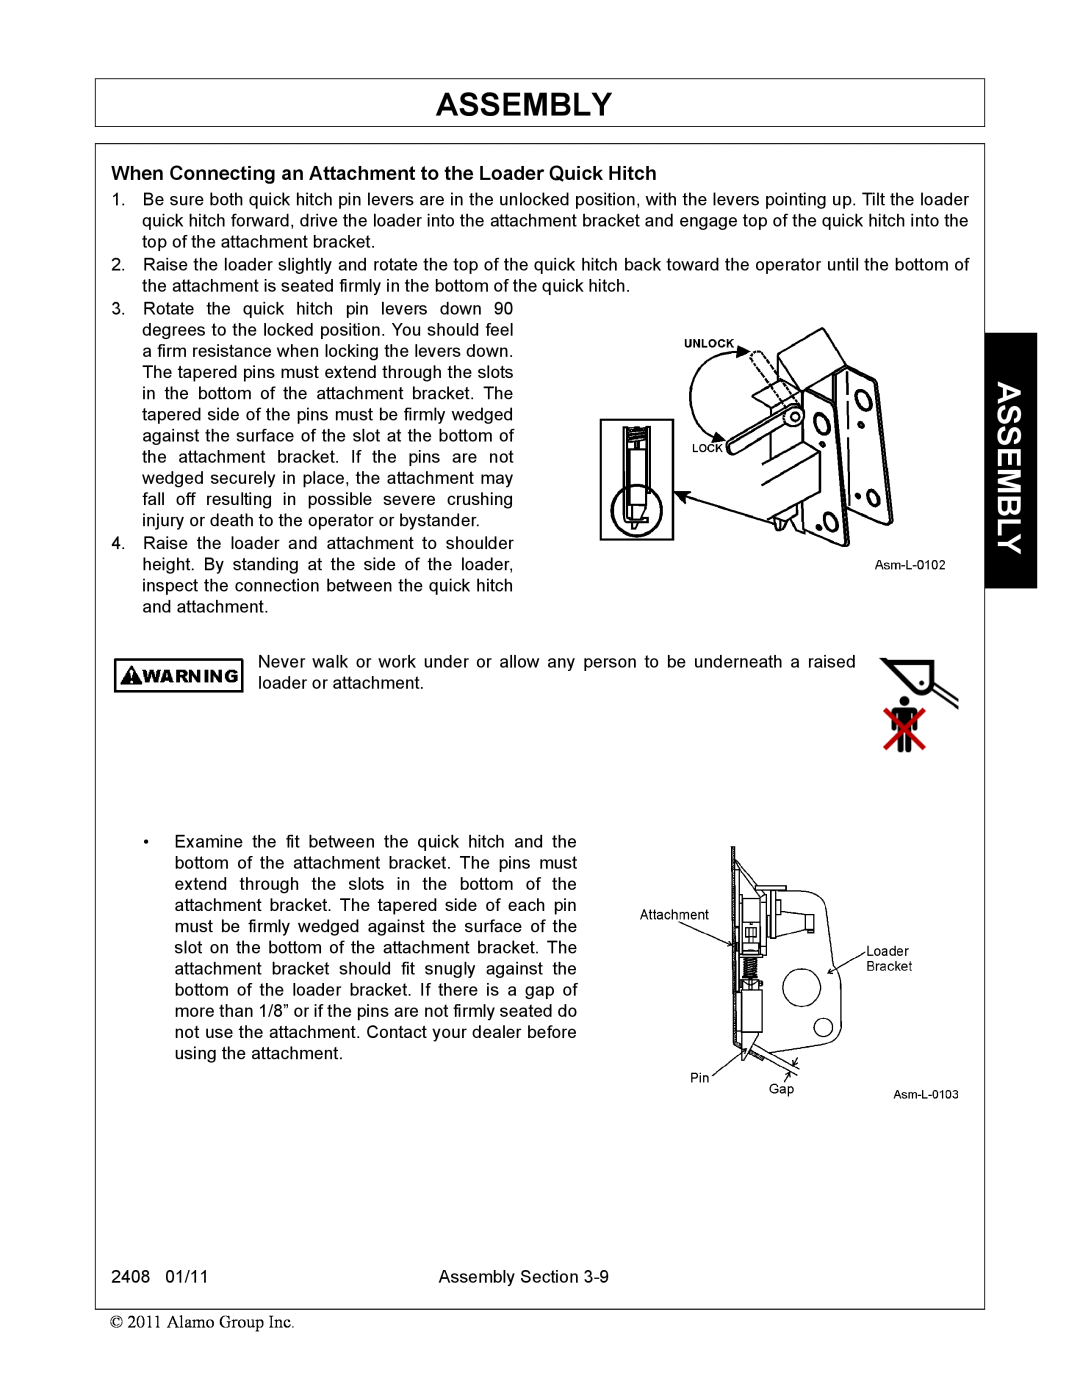 Rhino Mounts 2408 manual Assembly, When Connecting an Attachment to the Loader Quick Hitch 